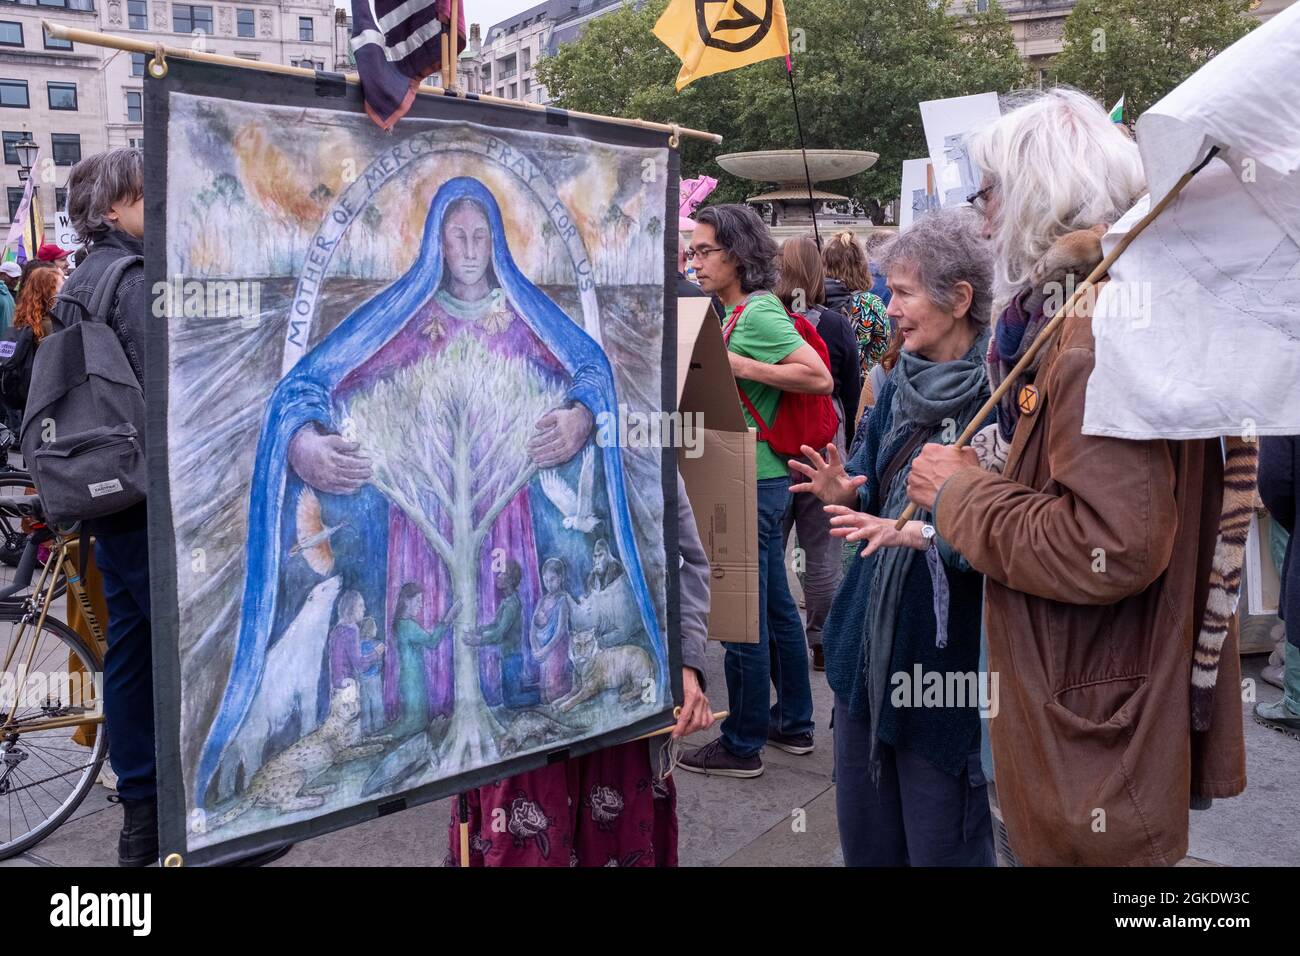 Demonstrators at the Extinction Rebellion ‘Tea Party’ rally, September 4th 2020 in Central London. The march was combined with a pro-life demonstration Stock Photo